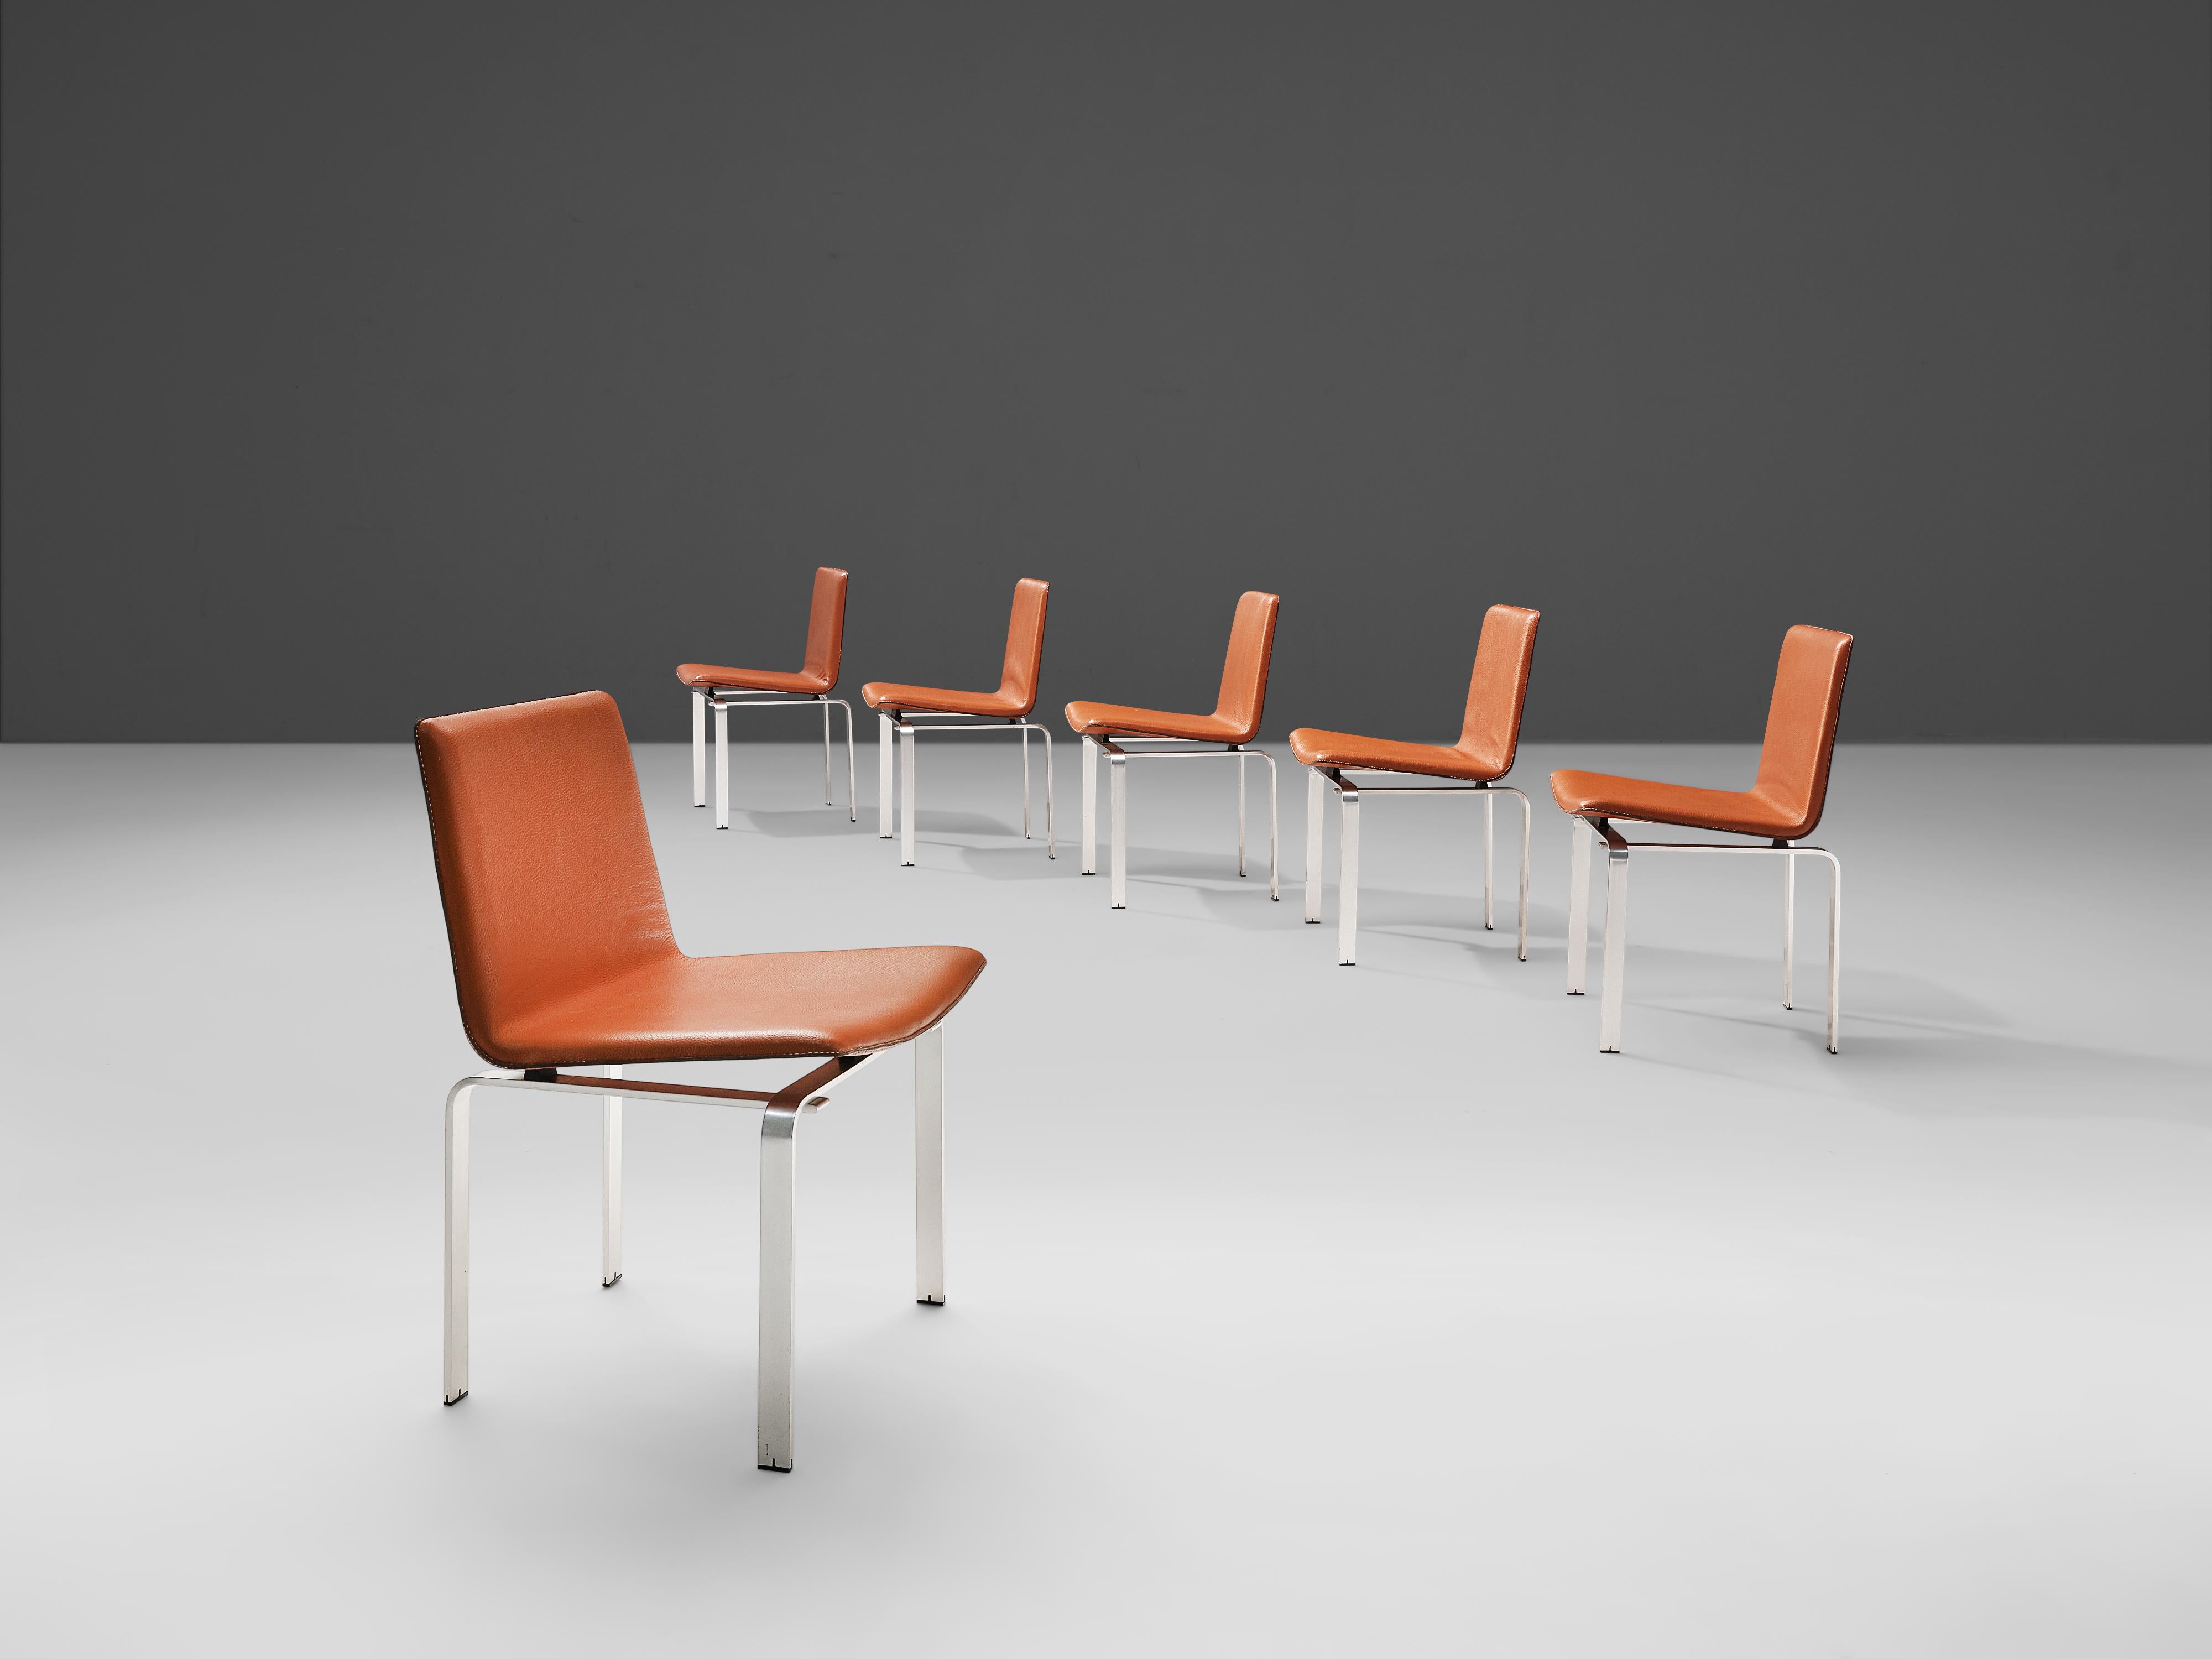 Jørgen Høj for Niels Vitsoe, set of six dining chairs, leather, brushed aluminum, Denmark, 1960s

Minimalist dining chairs by Jørgen Høj for Niels Vitsoe. Clearly influenced by his teacher, Poul Kjaerholm, Høj used high quality supple leather and